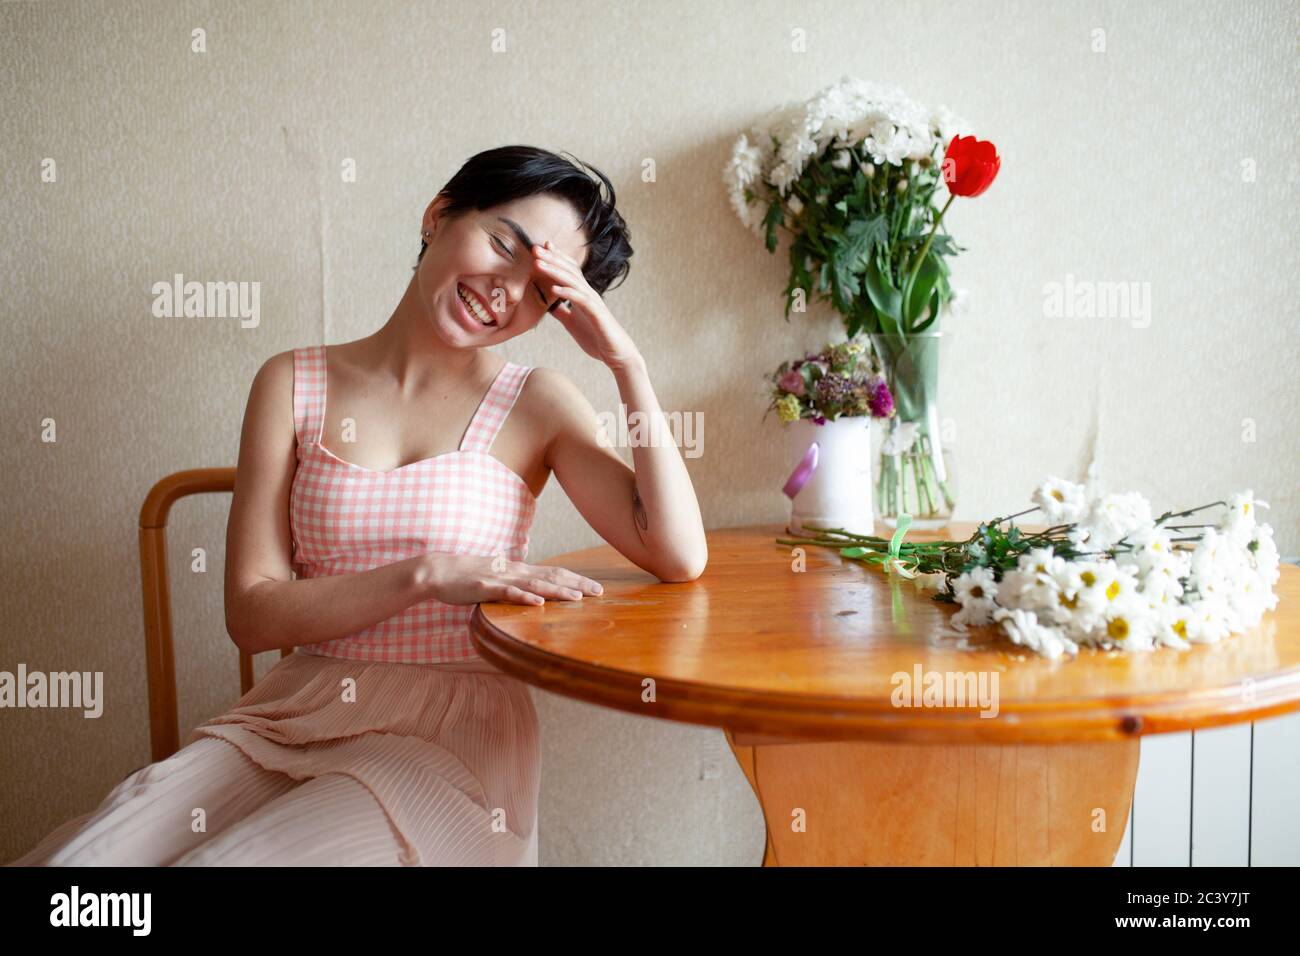 Young woman sitting at table with flowers Stock Photo